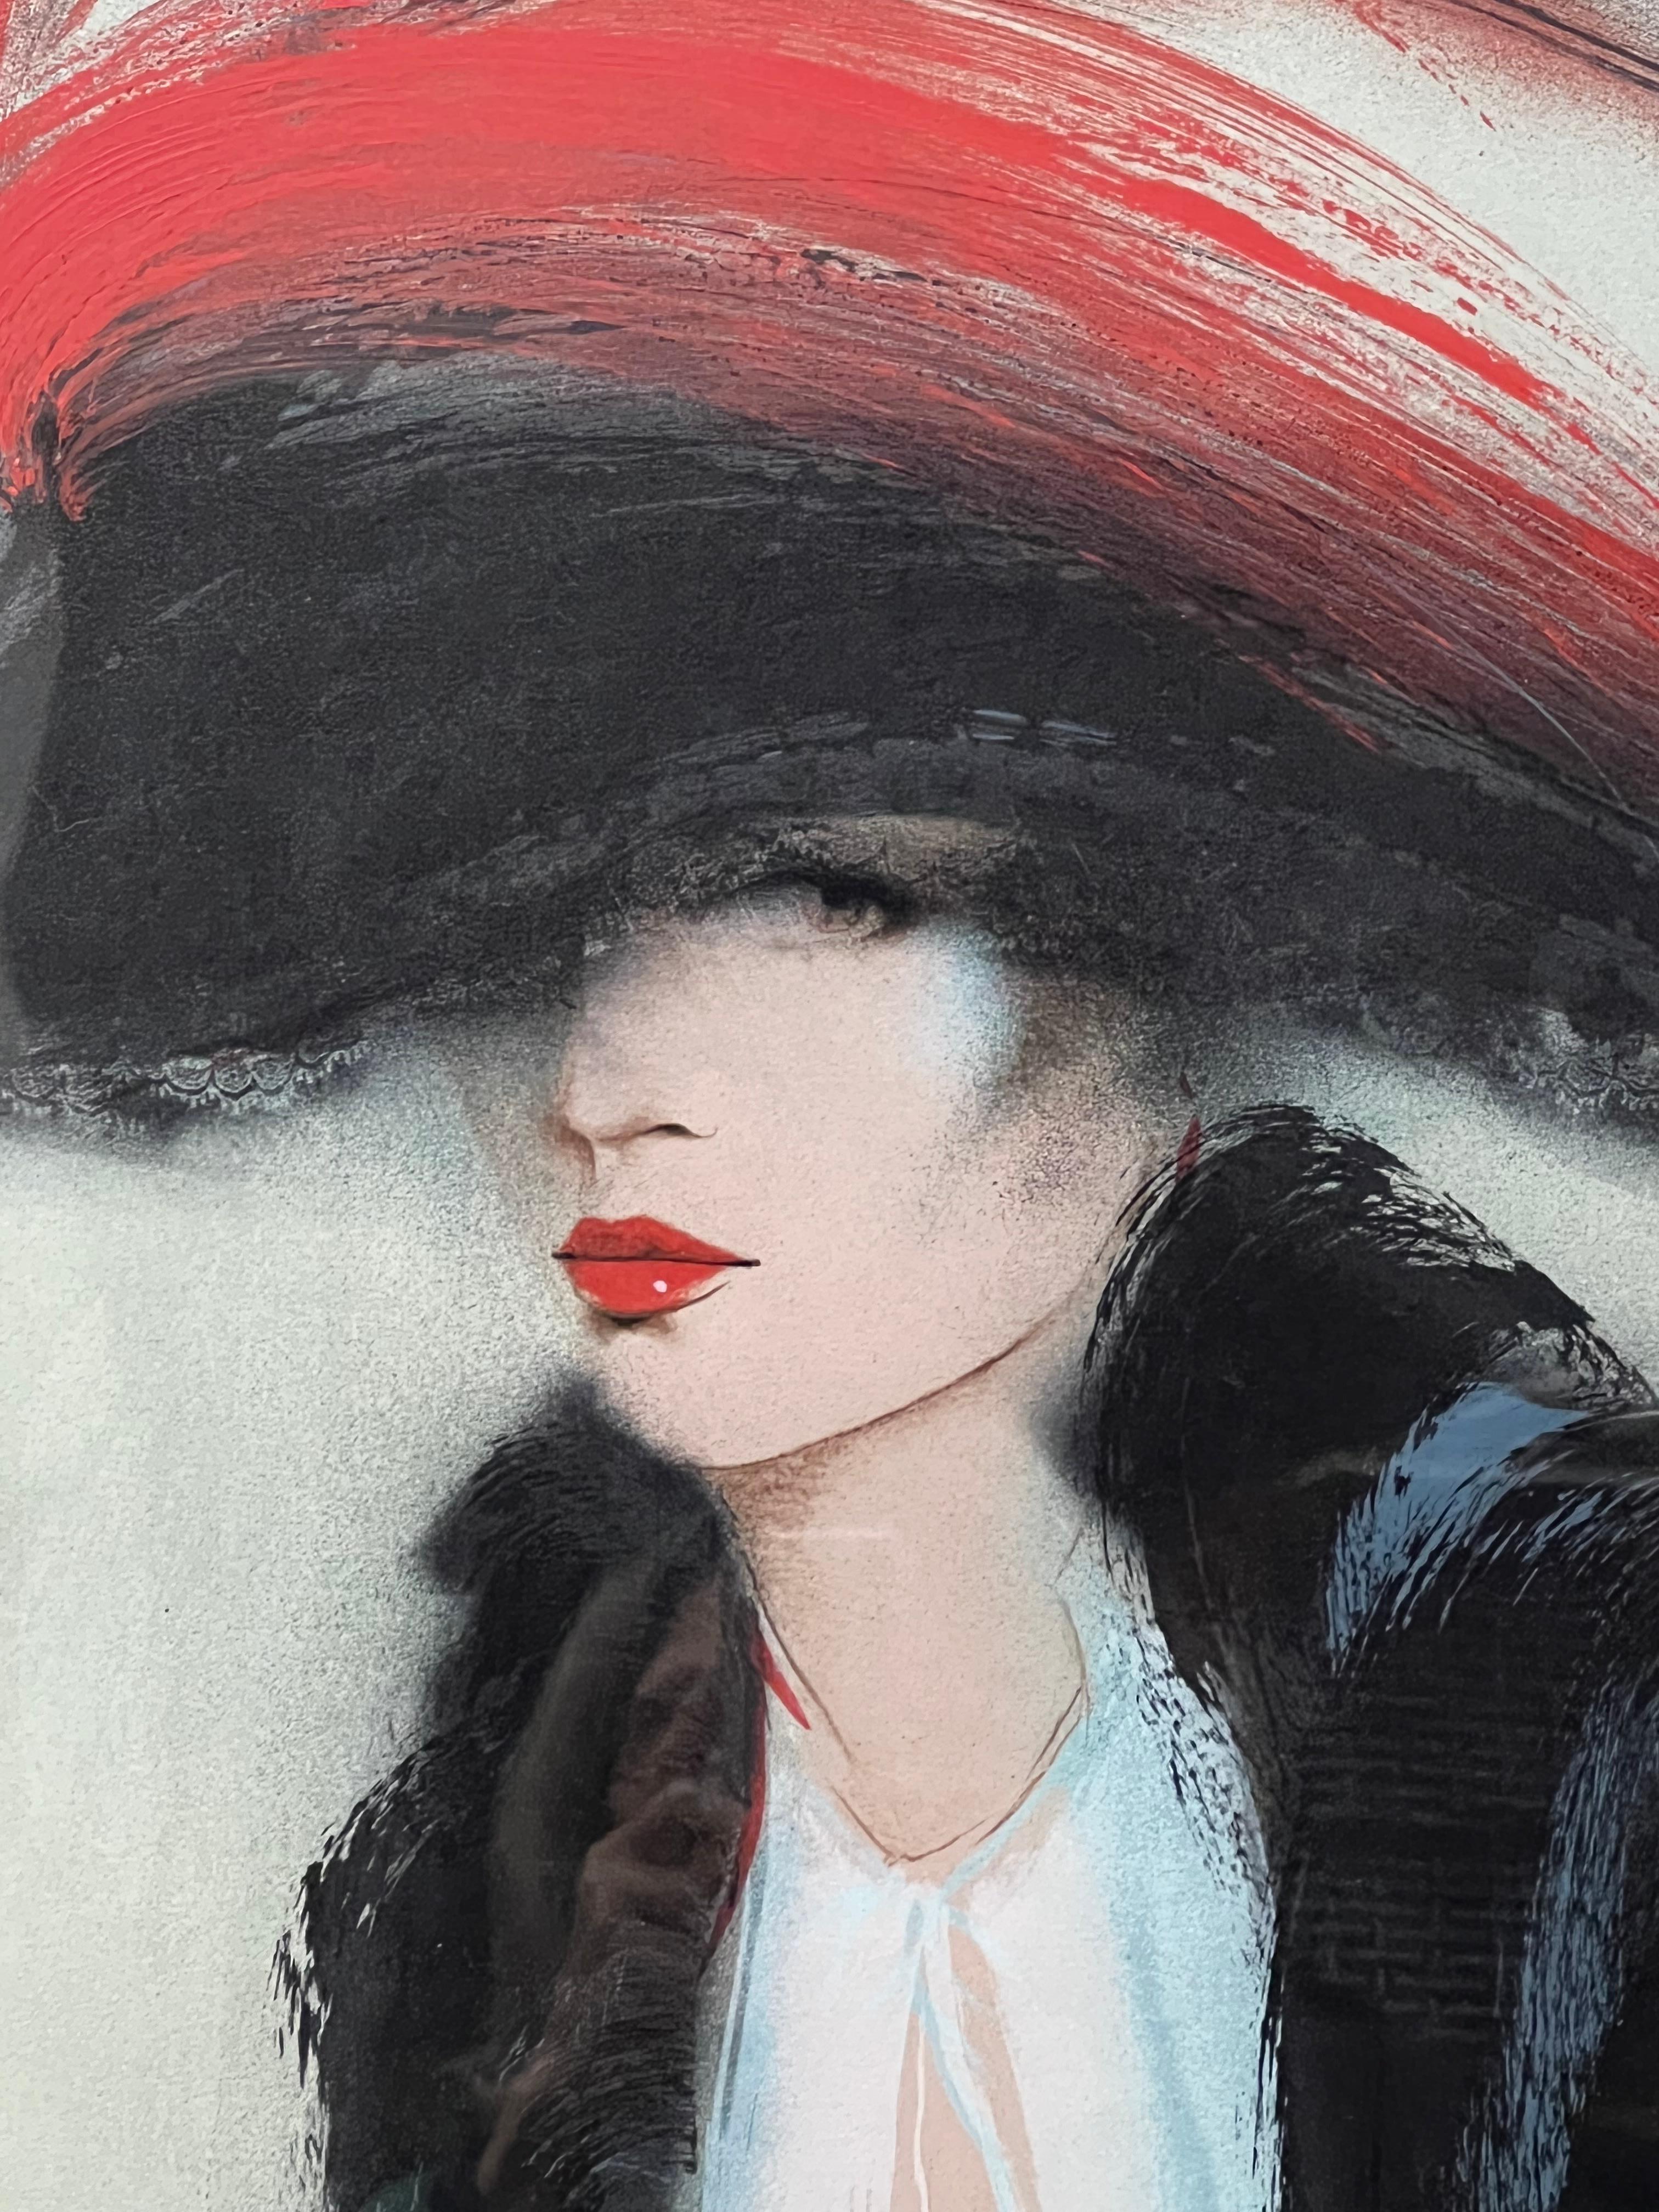 This color lithograph is by Victoria Montesinos. It features an elegant lady from early 20th Century holding a rose in her right hand. The artist matches the red of her lipstick with the color of the rose. The large hat covering almost her eyesight